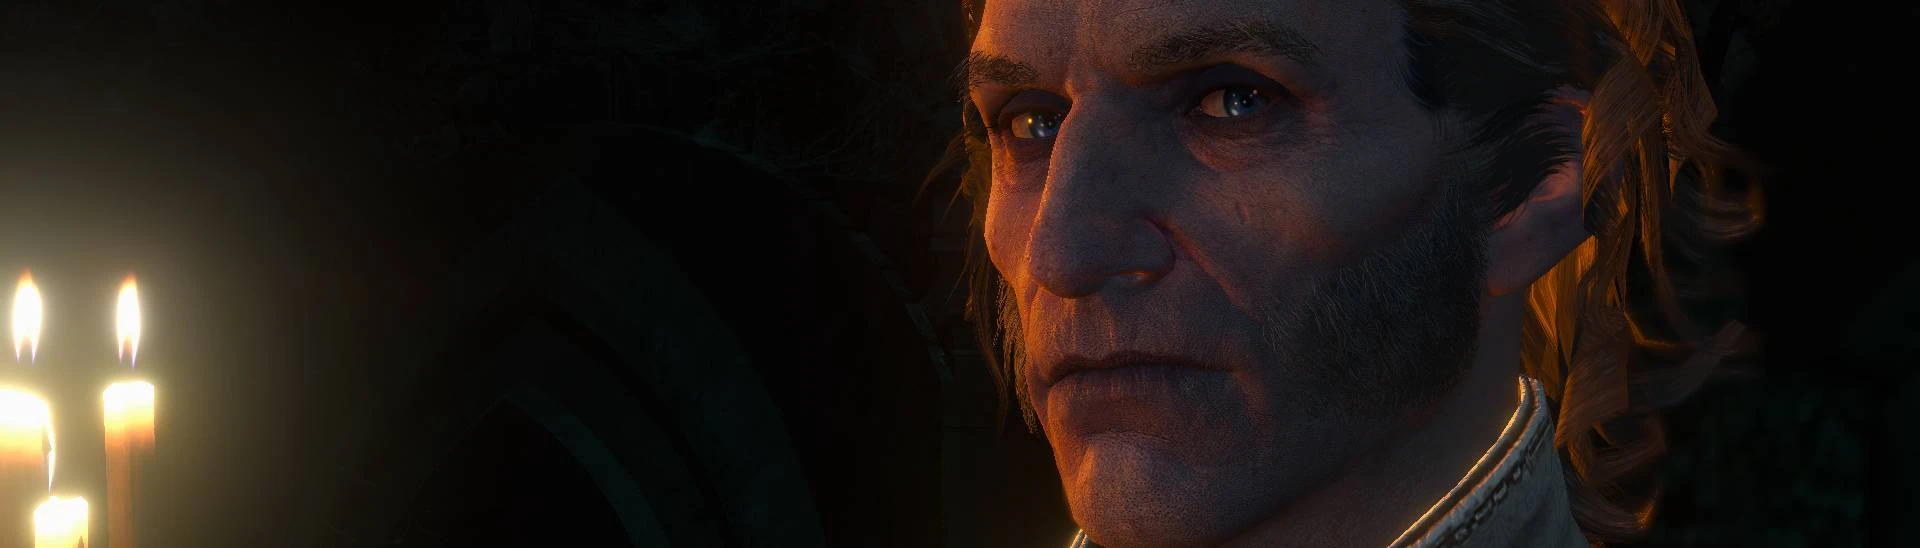 Geralt Face Retexture (Face from The Witcher 3) at The Witcher Nexus - mods  and community